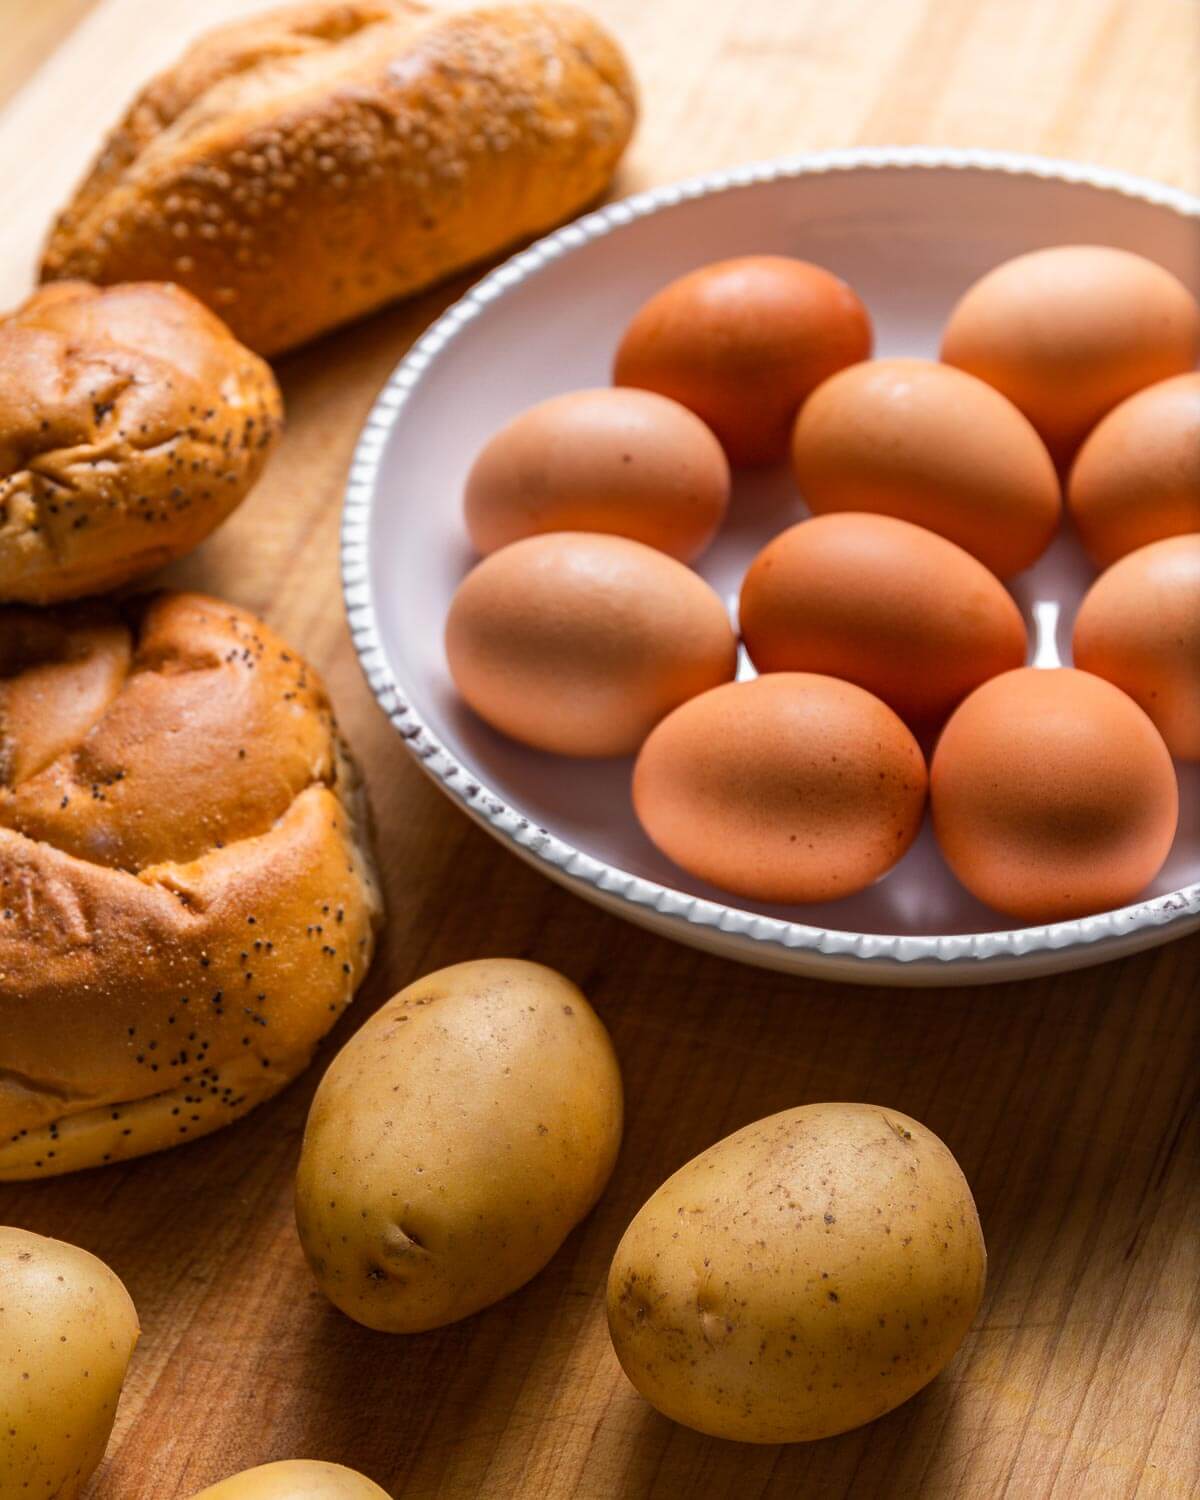 Ingredients shown: rolls and hero bread, egg, and potatoes.